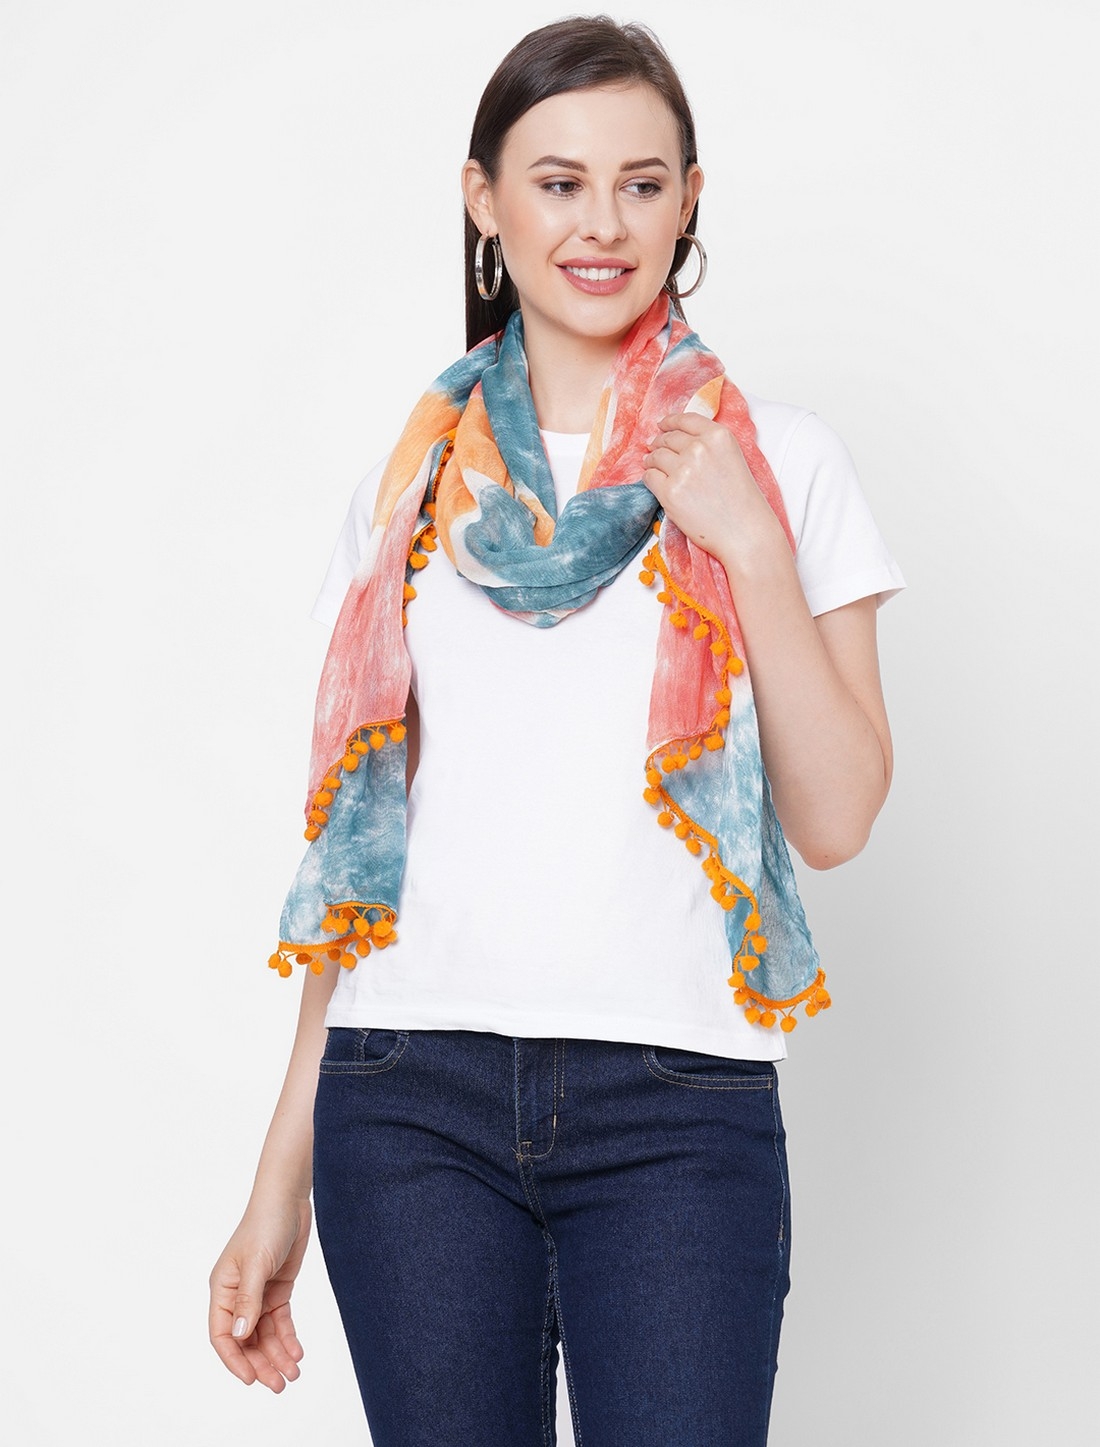 Get Wrapped | Get Wrapped Multi-Coloured Tie-Dye Large Scarf with Poms for Women